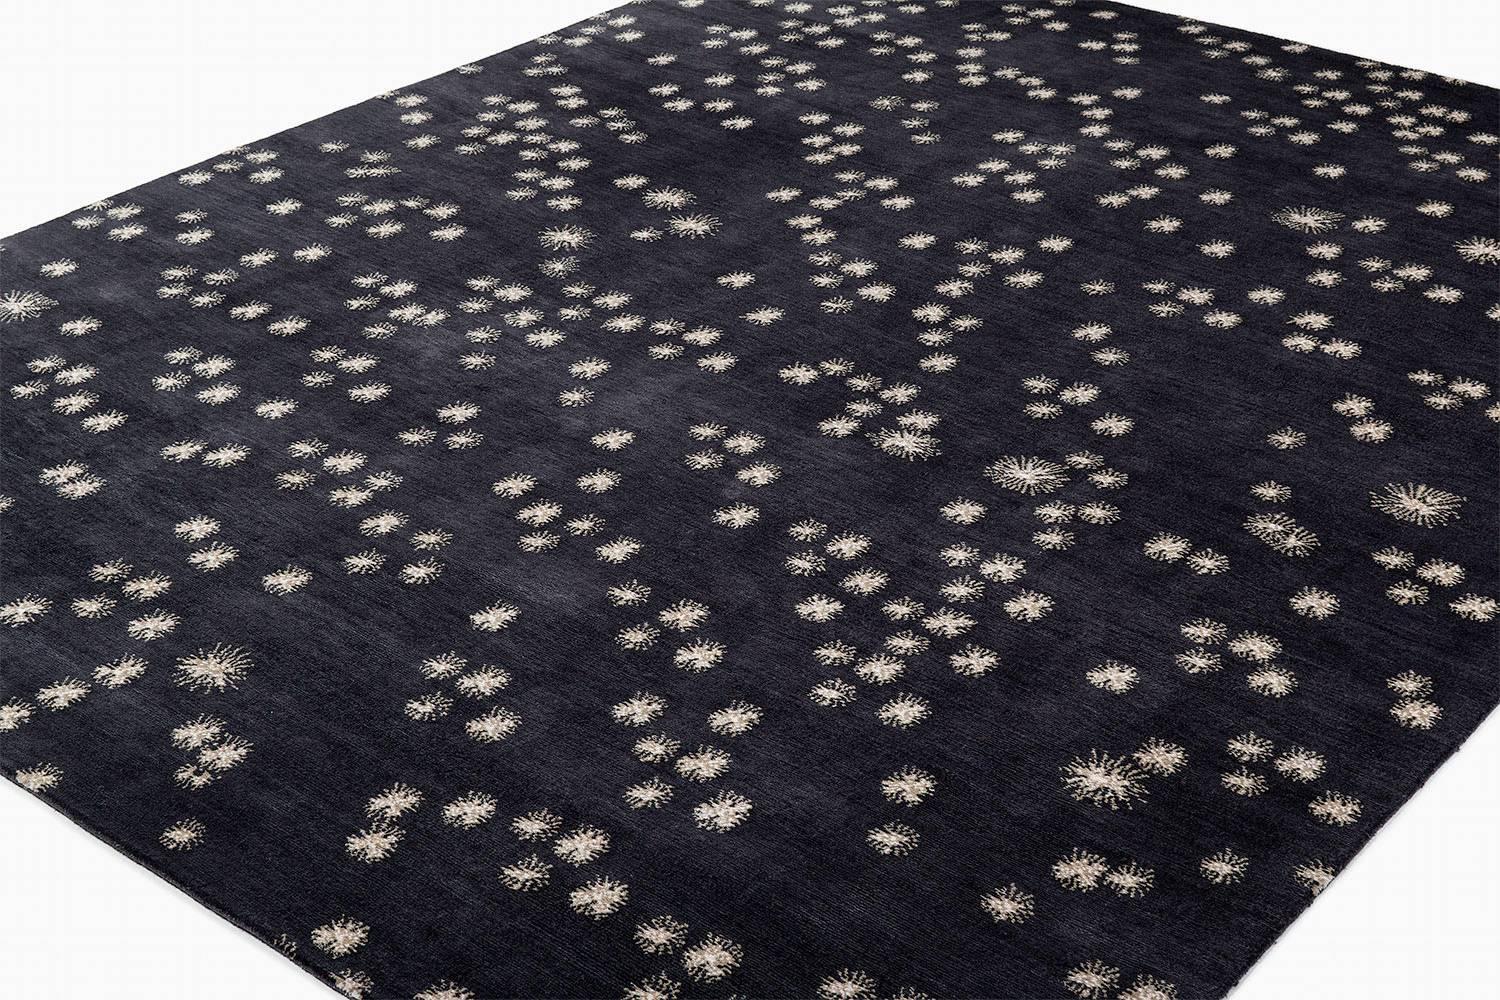 

A dark soft and inviting carpet, Japanese Asterisk features ethereal puffs of beige across an eggplant-toned background. The silk and wool blend woven in 100 knots is luxurious and simple in design. Original design by Joseph Carini Carpets.